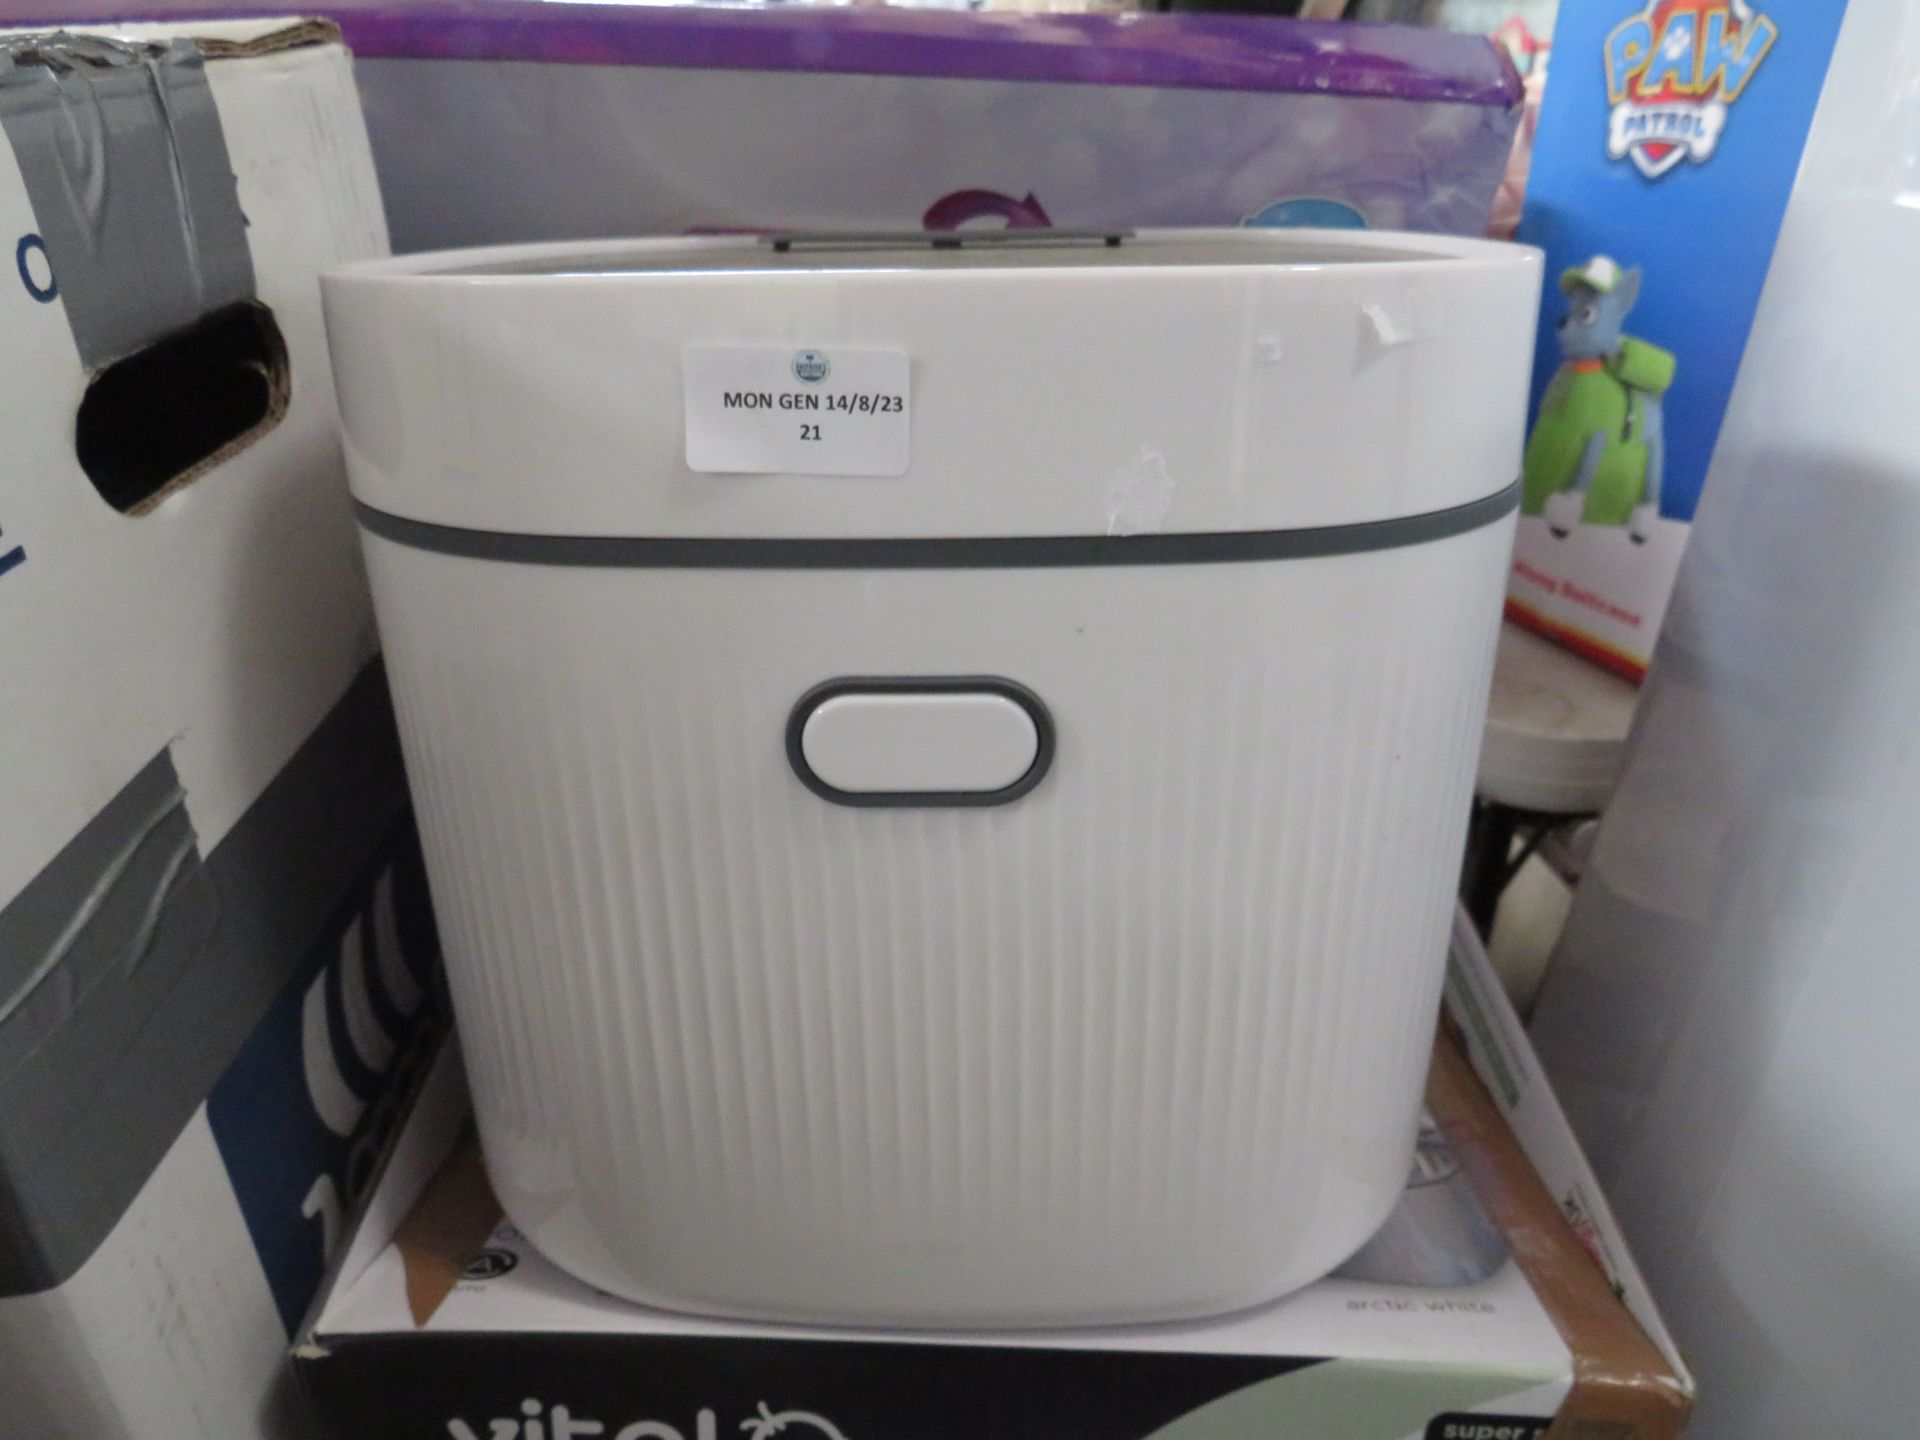 Viotal Baby Nurture advacned pro 3 in 1 steriliser, dryer and storage unit, powers on but unable